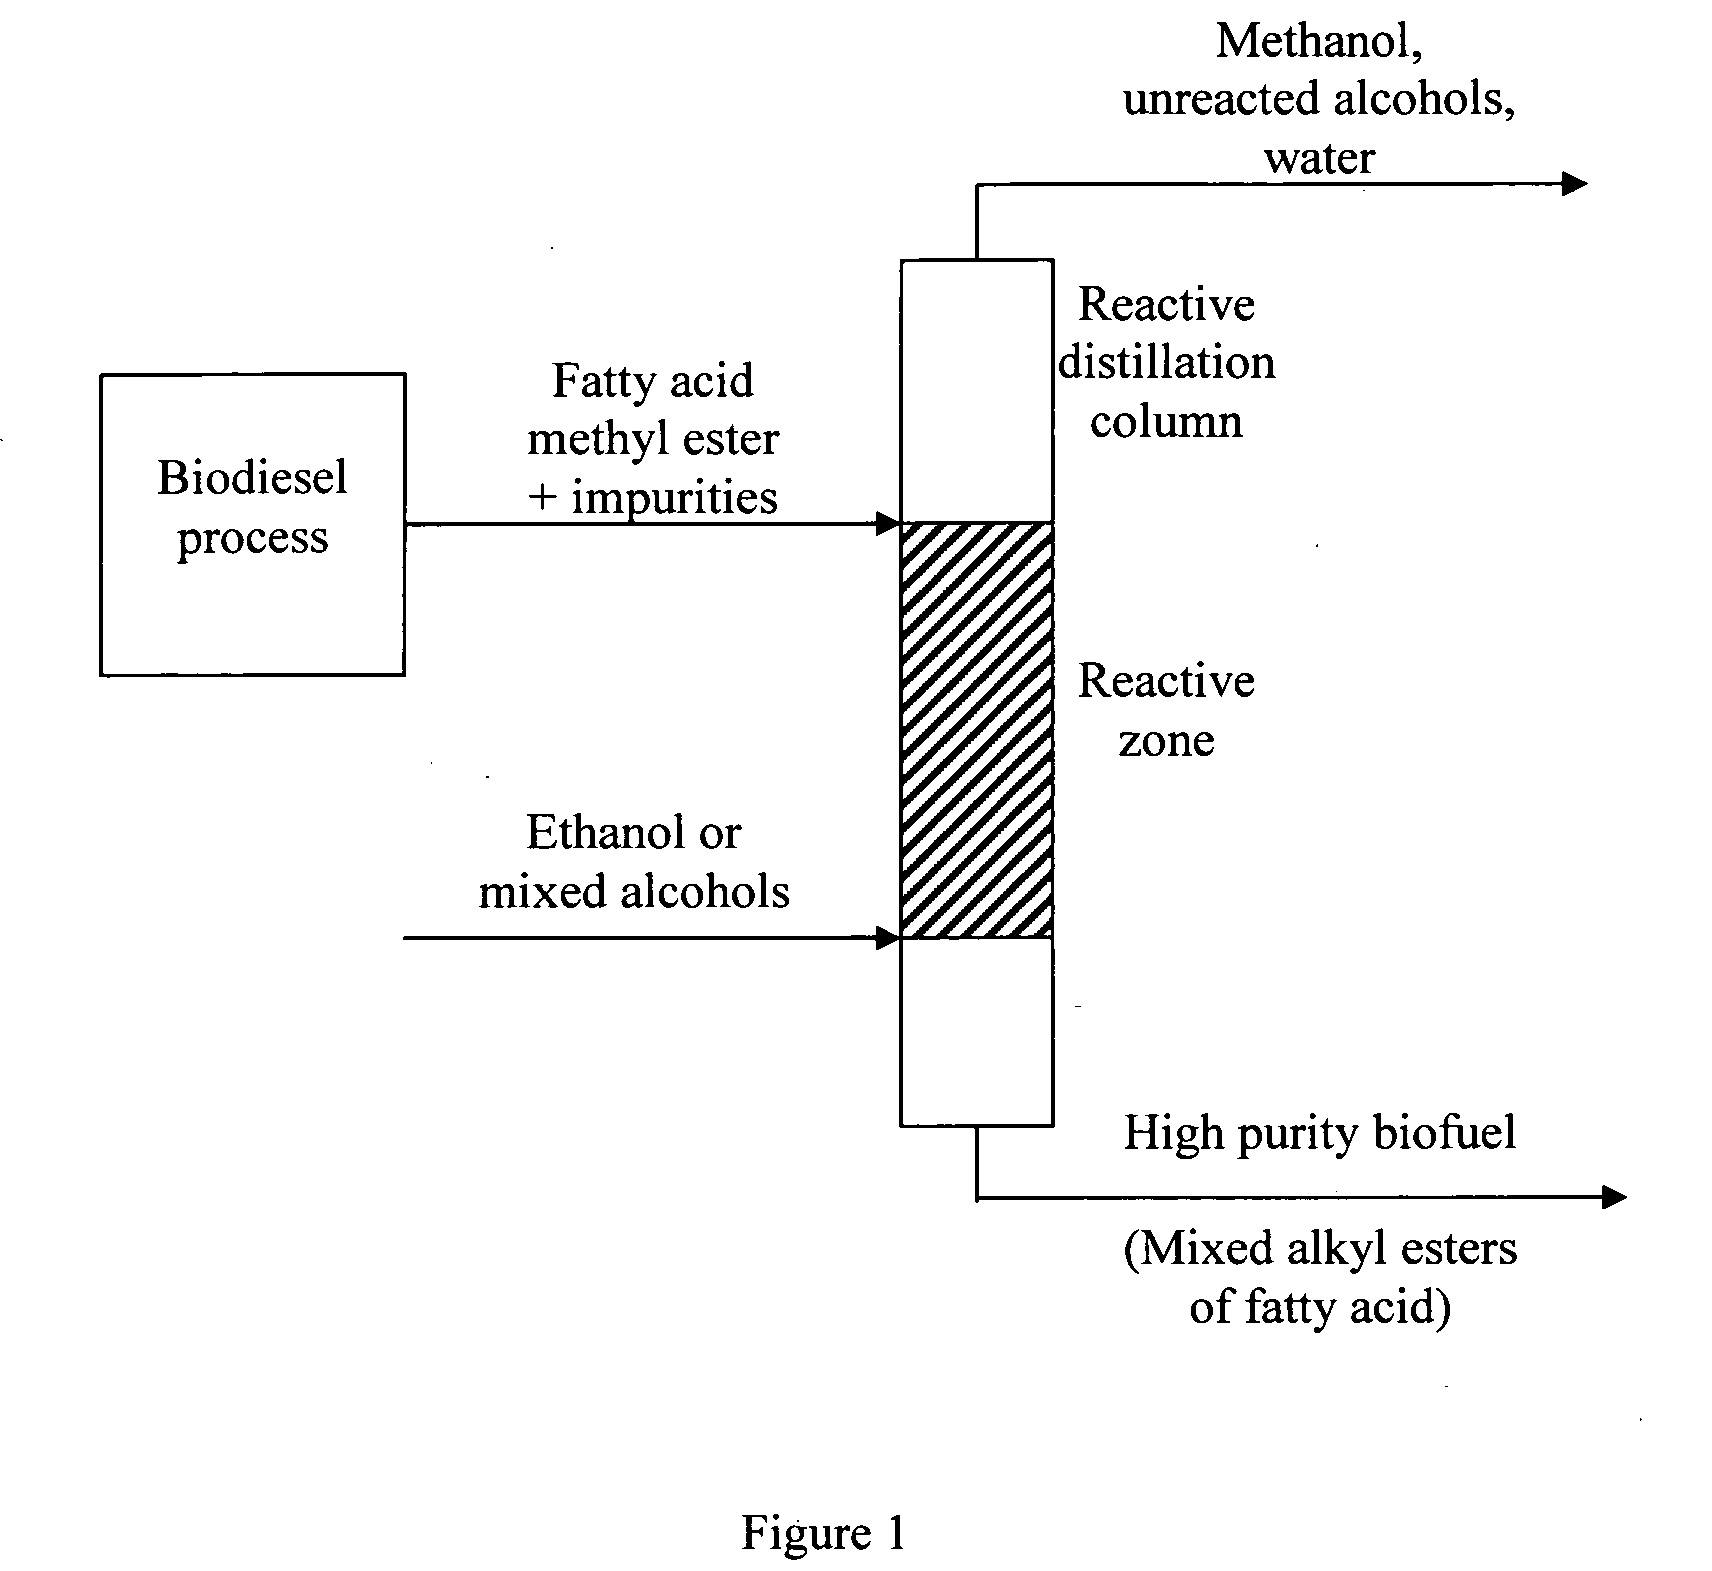 Process for producing mixed esters of fatty acids as biofuels